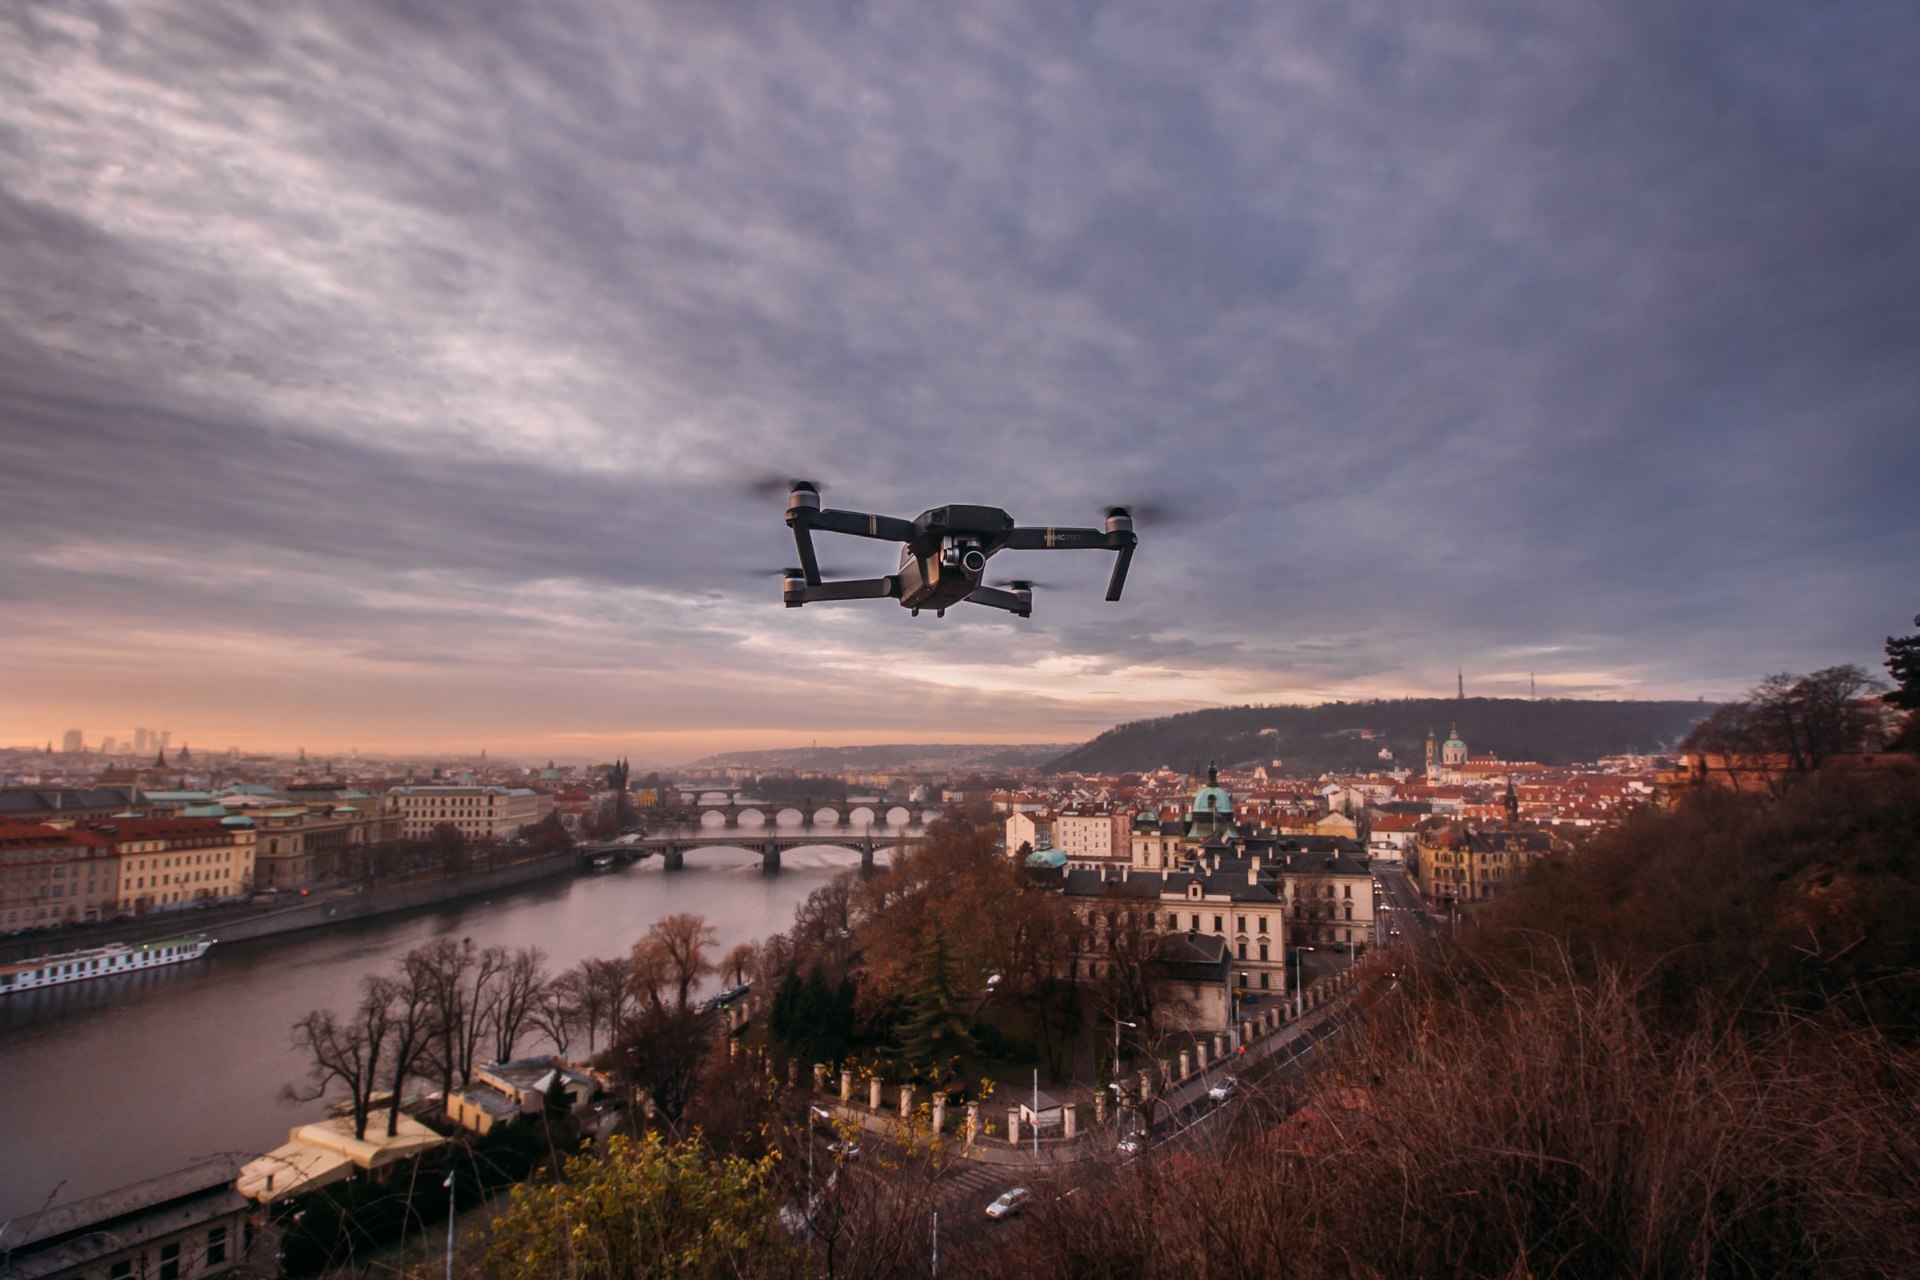 Flying drones and cities: a complicated relationship